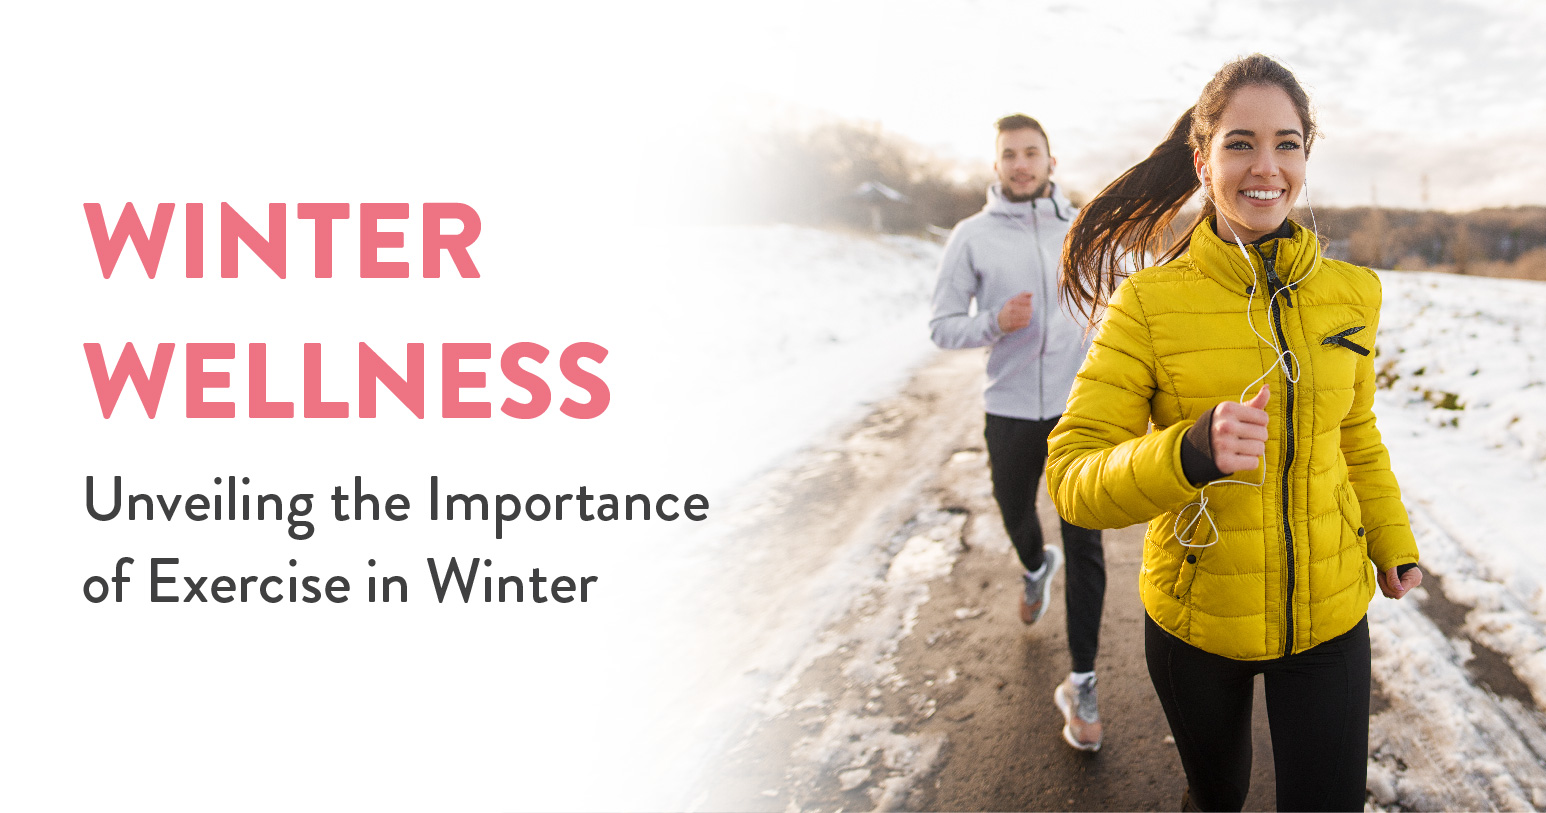 Importance of exercise in winter